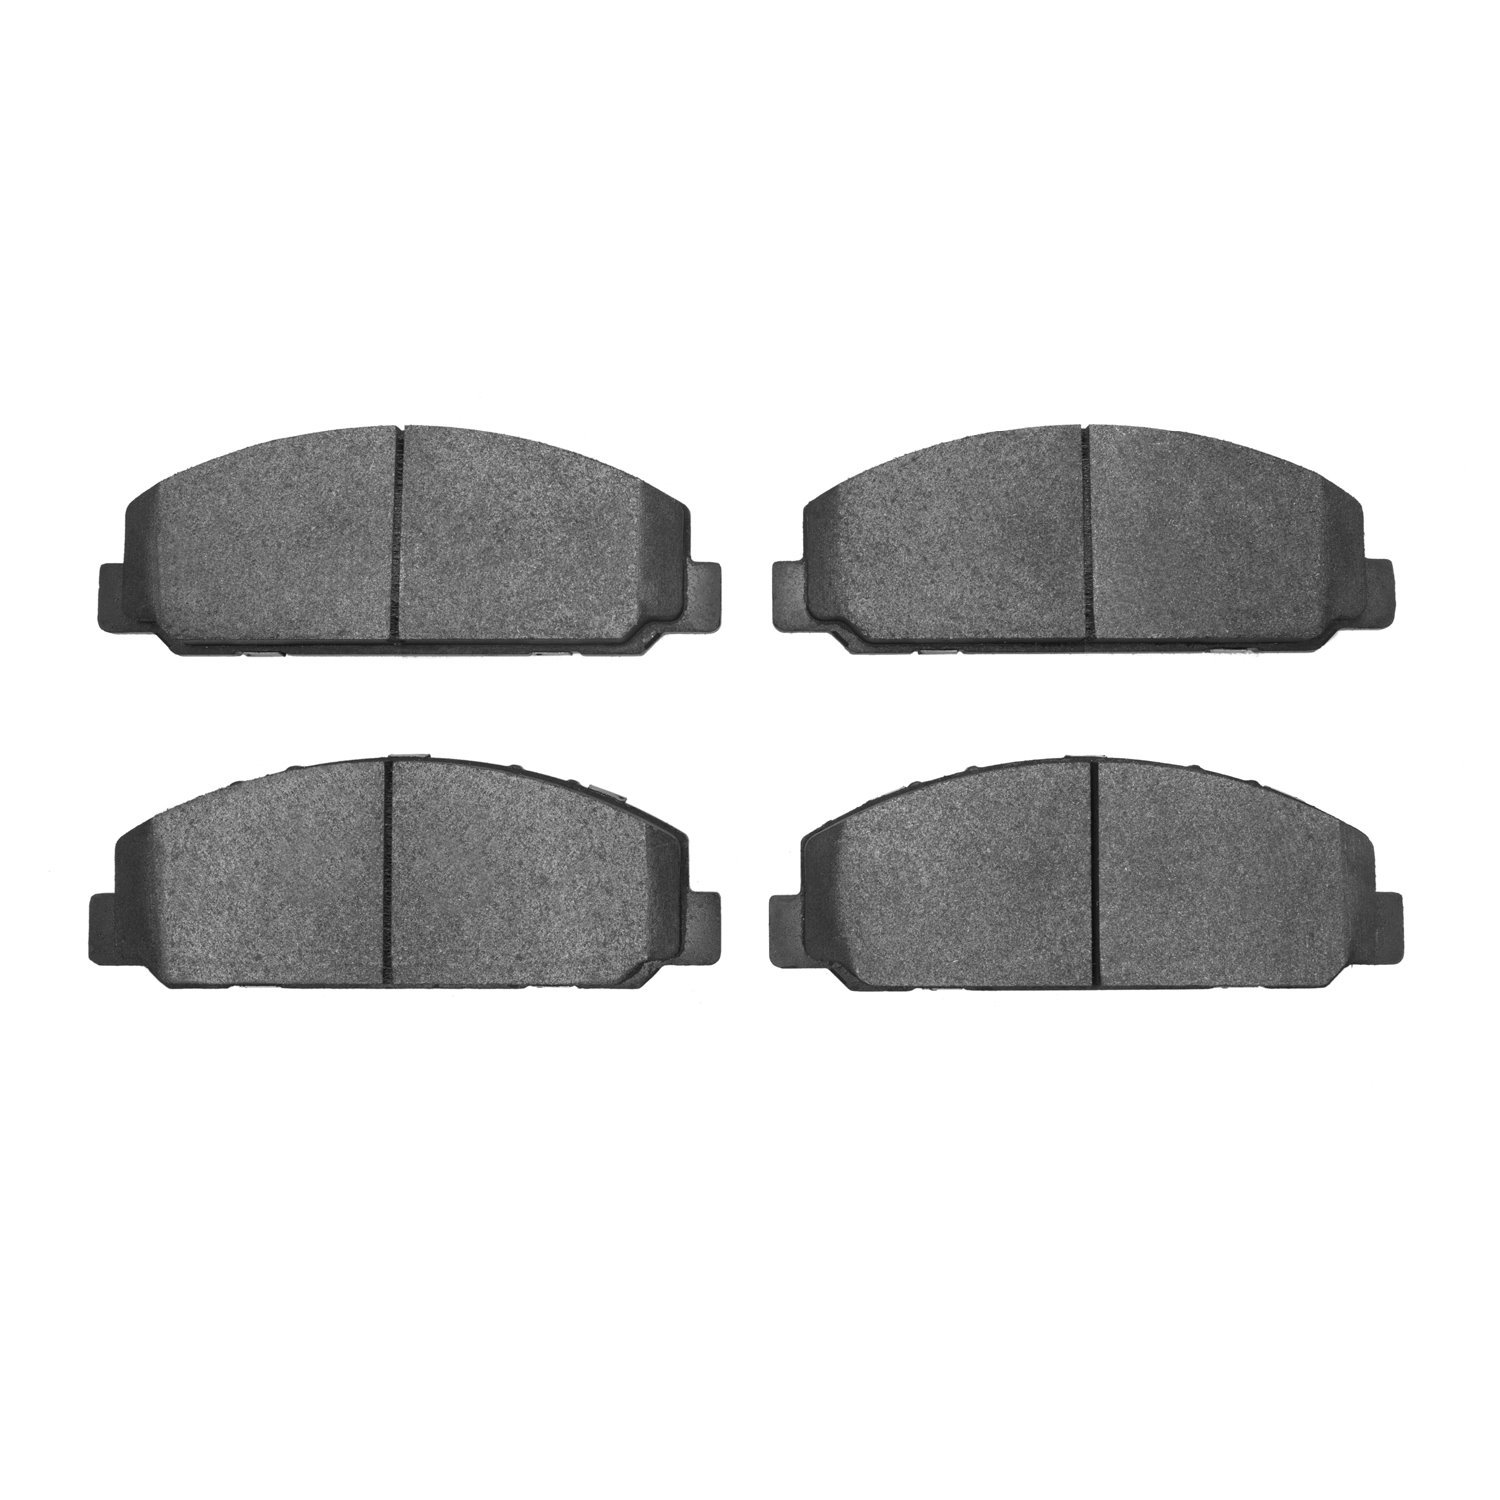 1214-0827-00 Heavy-Duty Semi-Metallic Brake Pads, Fits Select GM, Position: Fr,Front,Rr